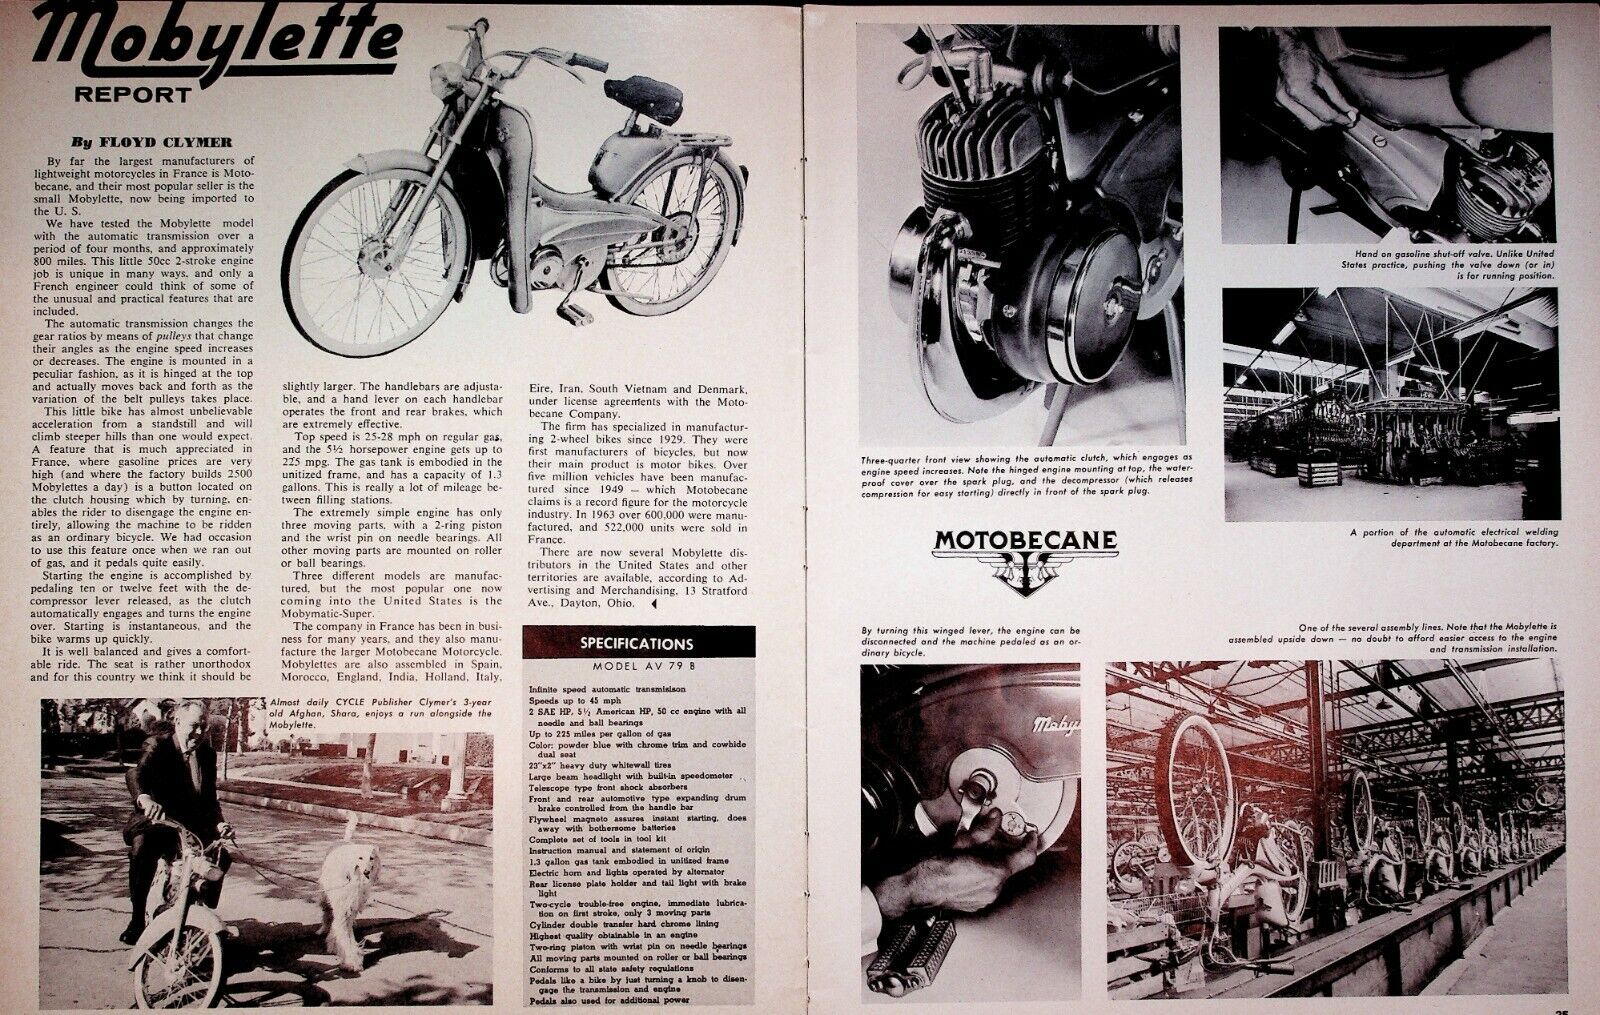 1965 Mobylette Motobecane Factory France - 2-Page Vintage Motorcycle Article